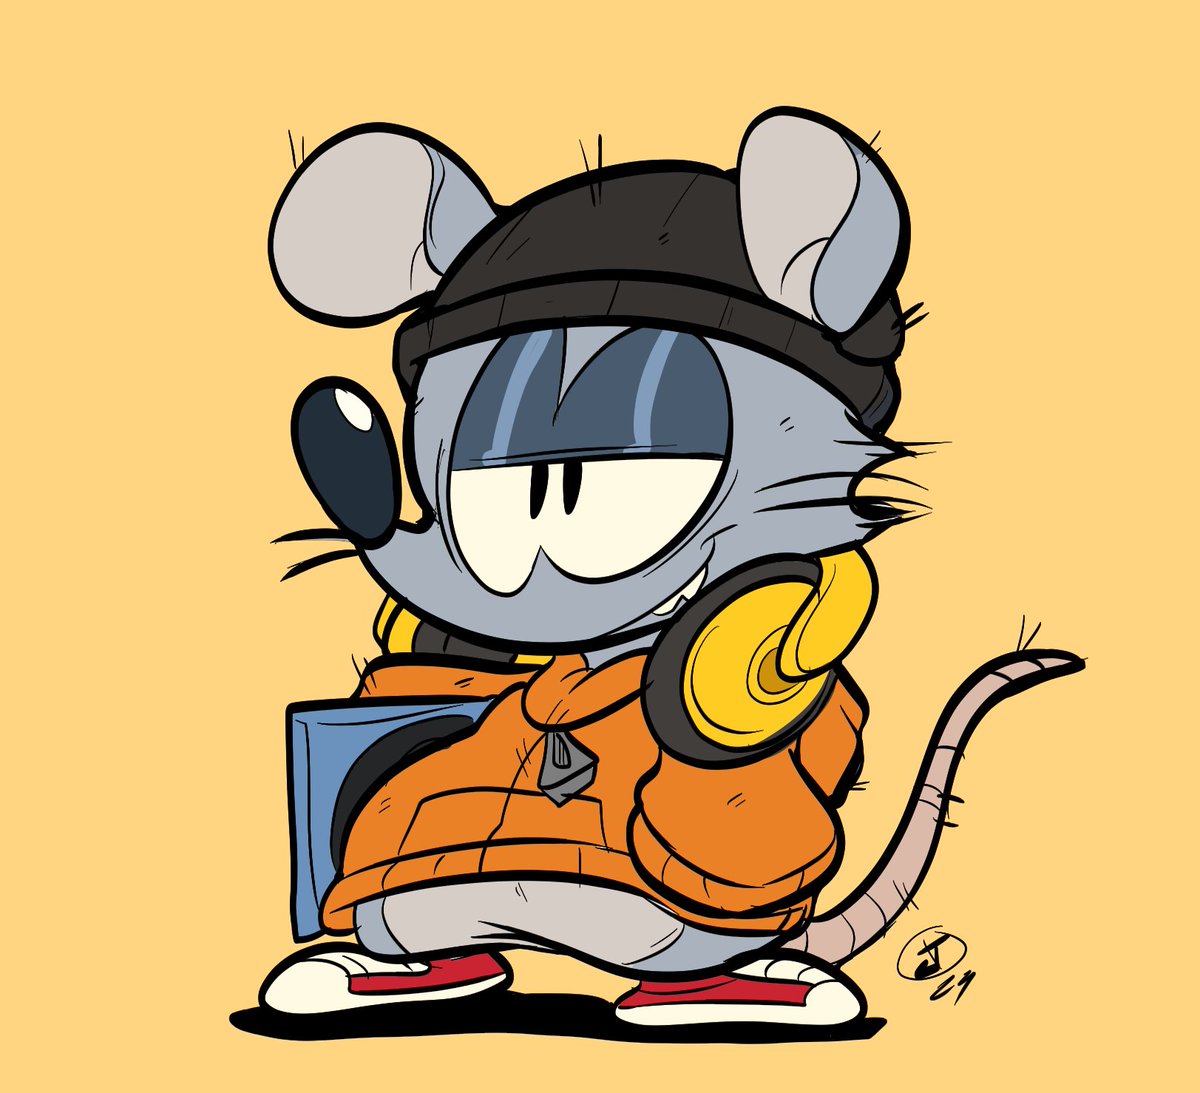 「Chicago House Mouse」|DumbNBass (Comms OPEN)のイラスト